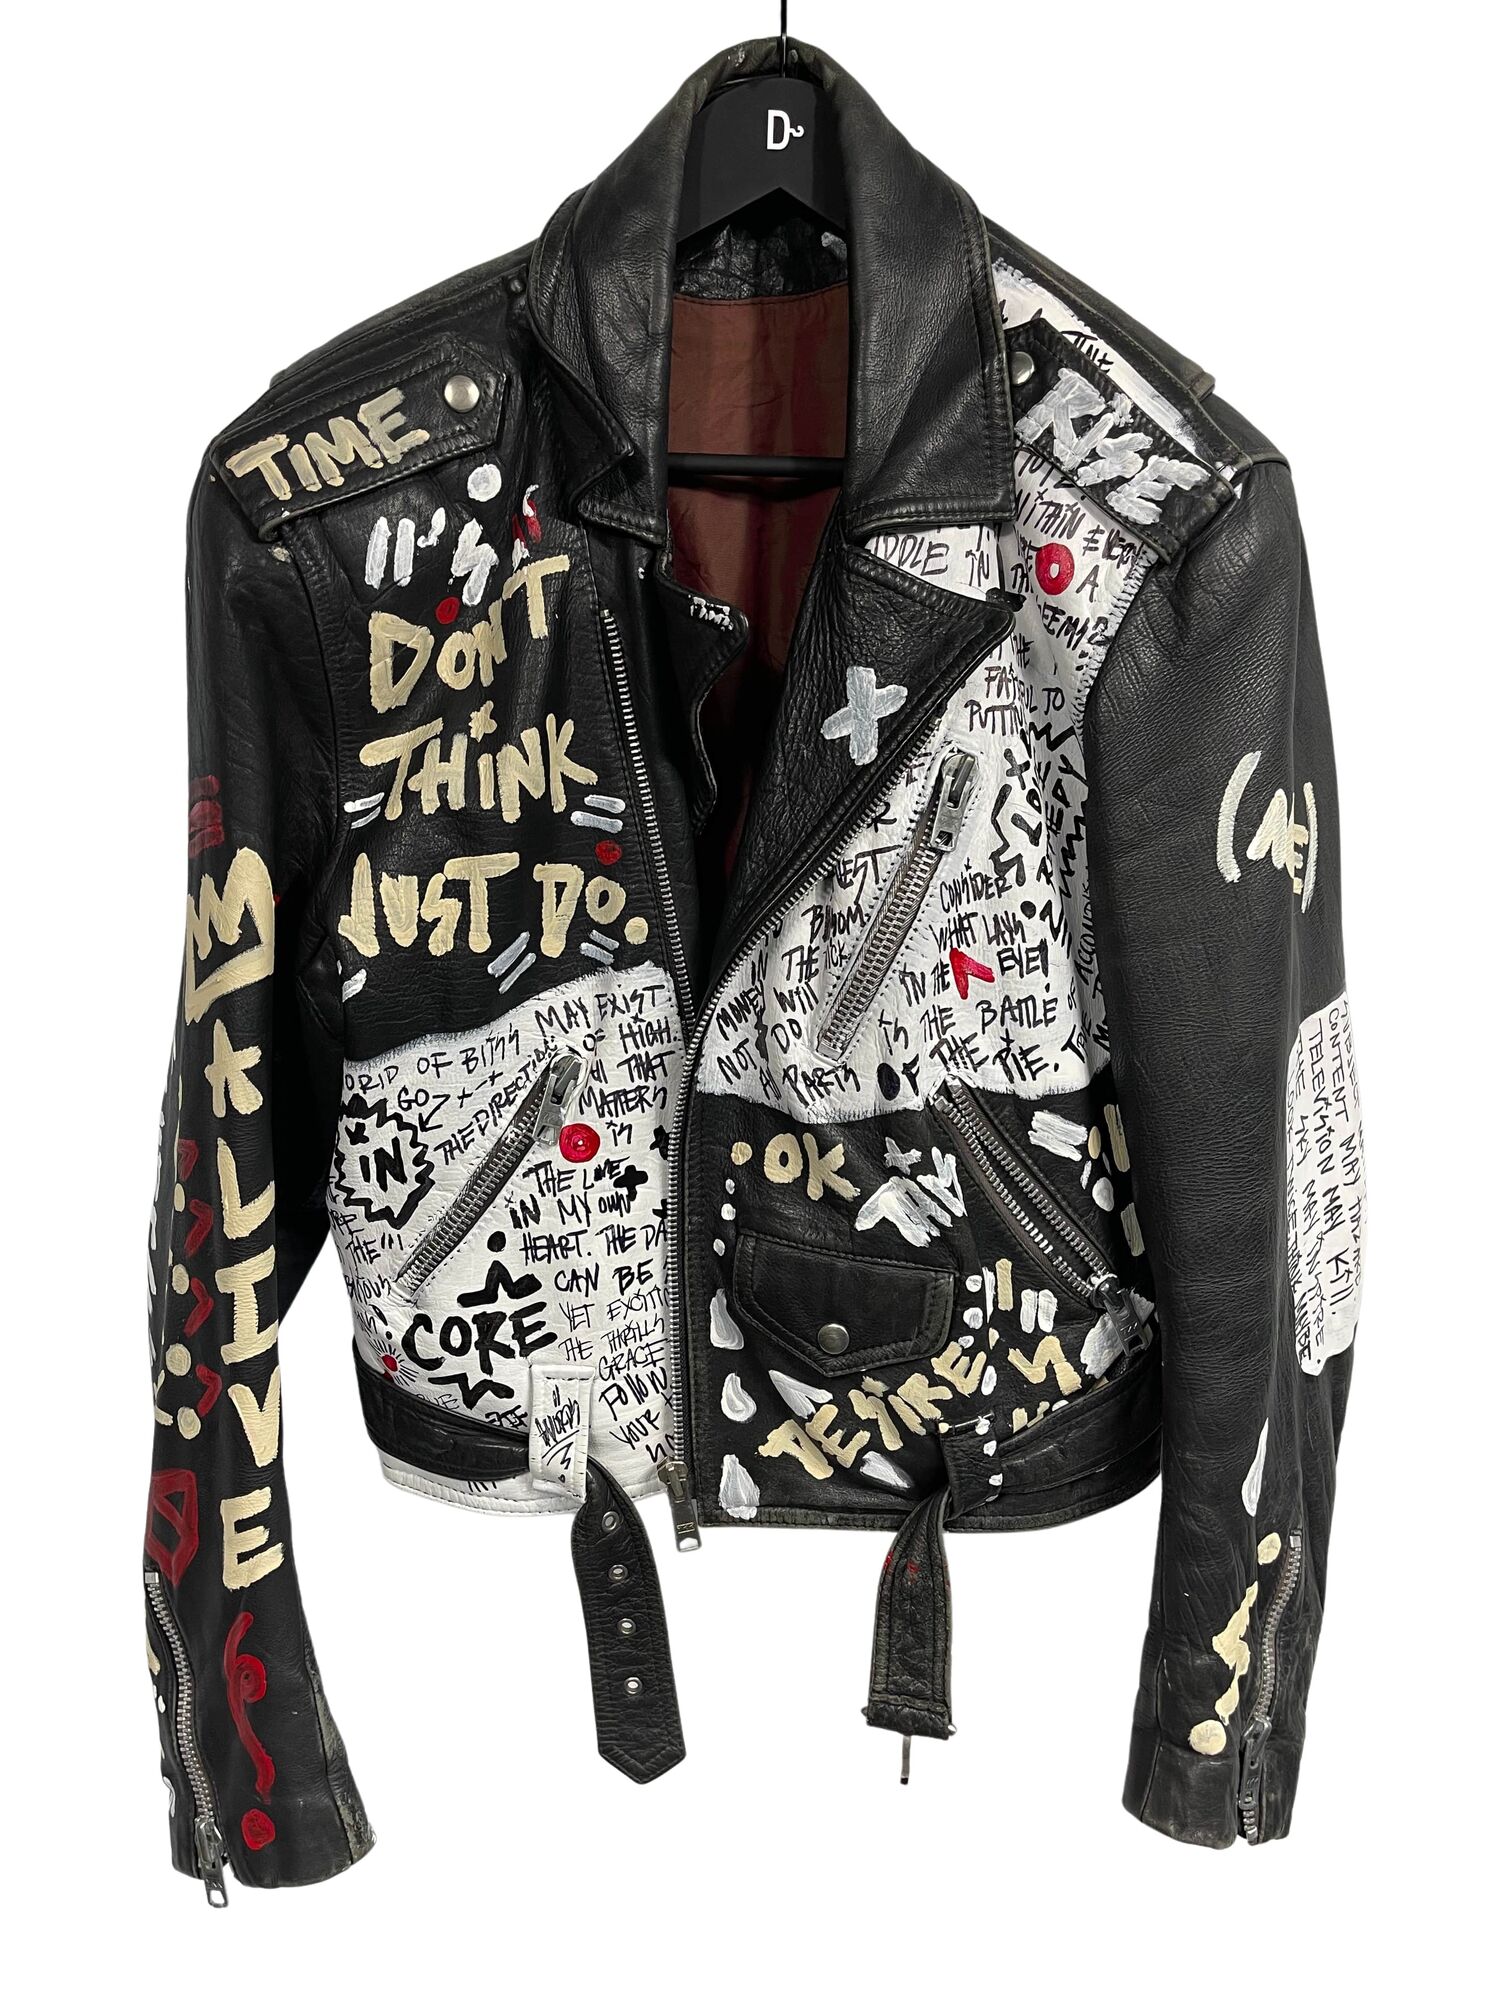 Graffiti-print leather biker jacket No brand - S, buy pre-owned at